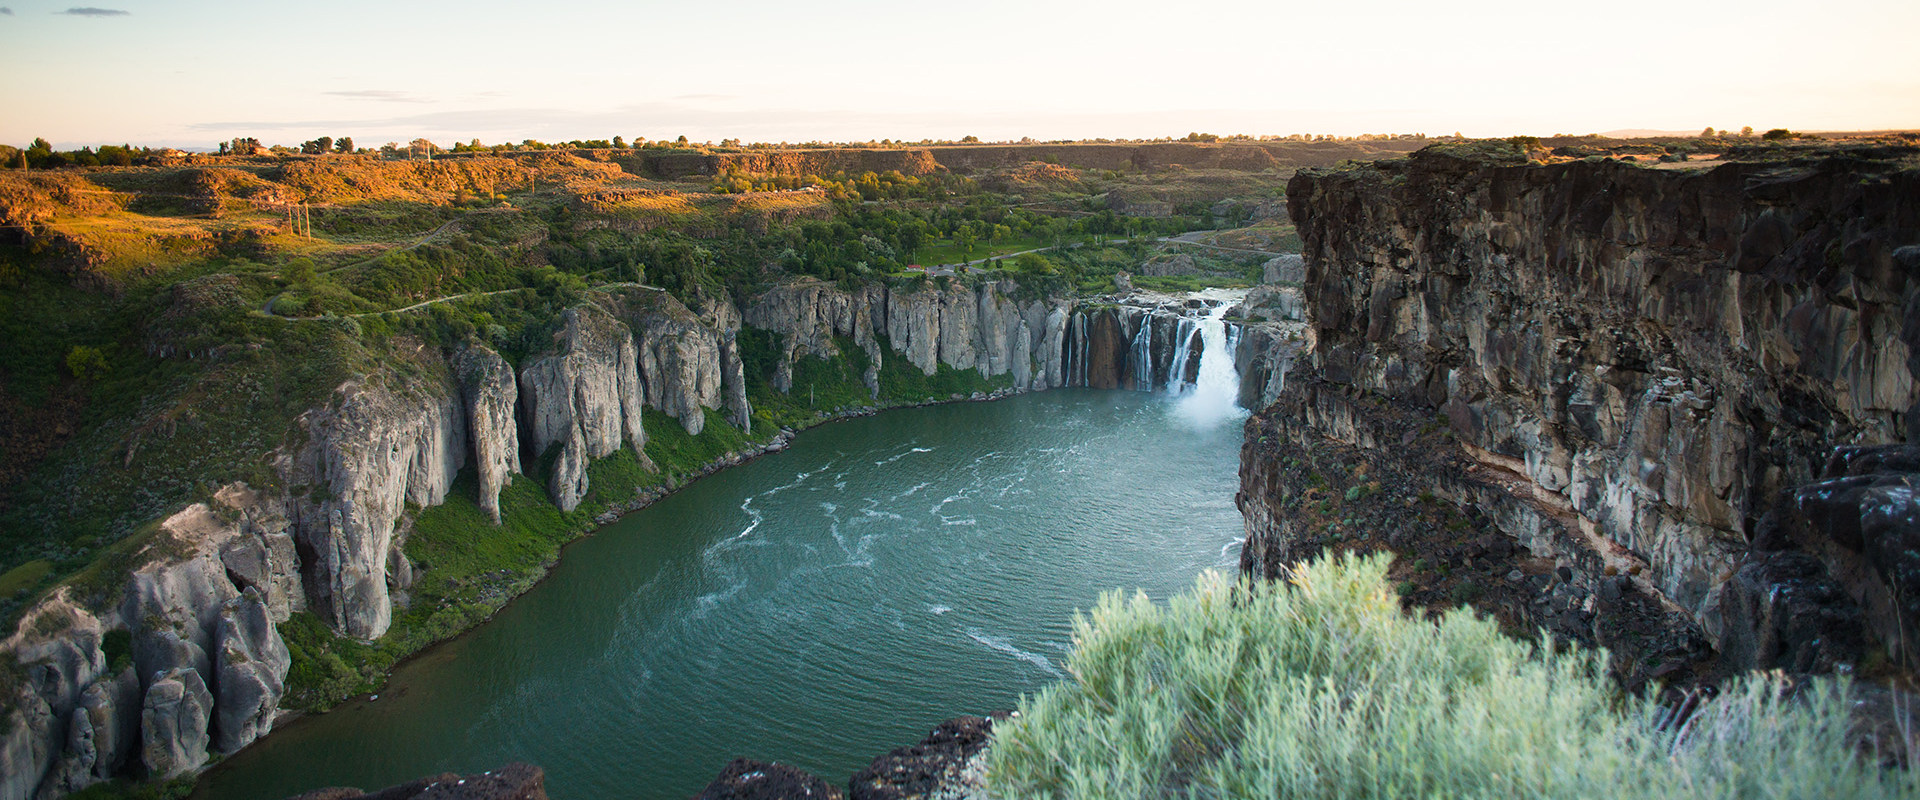 Safety Risks of Using Energy Resources in Post Falls, Idaho